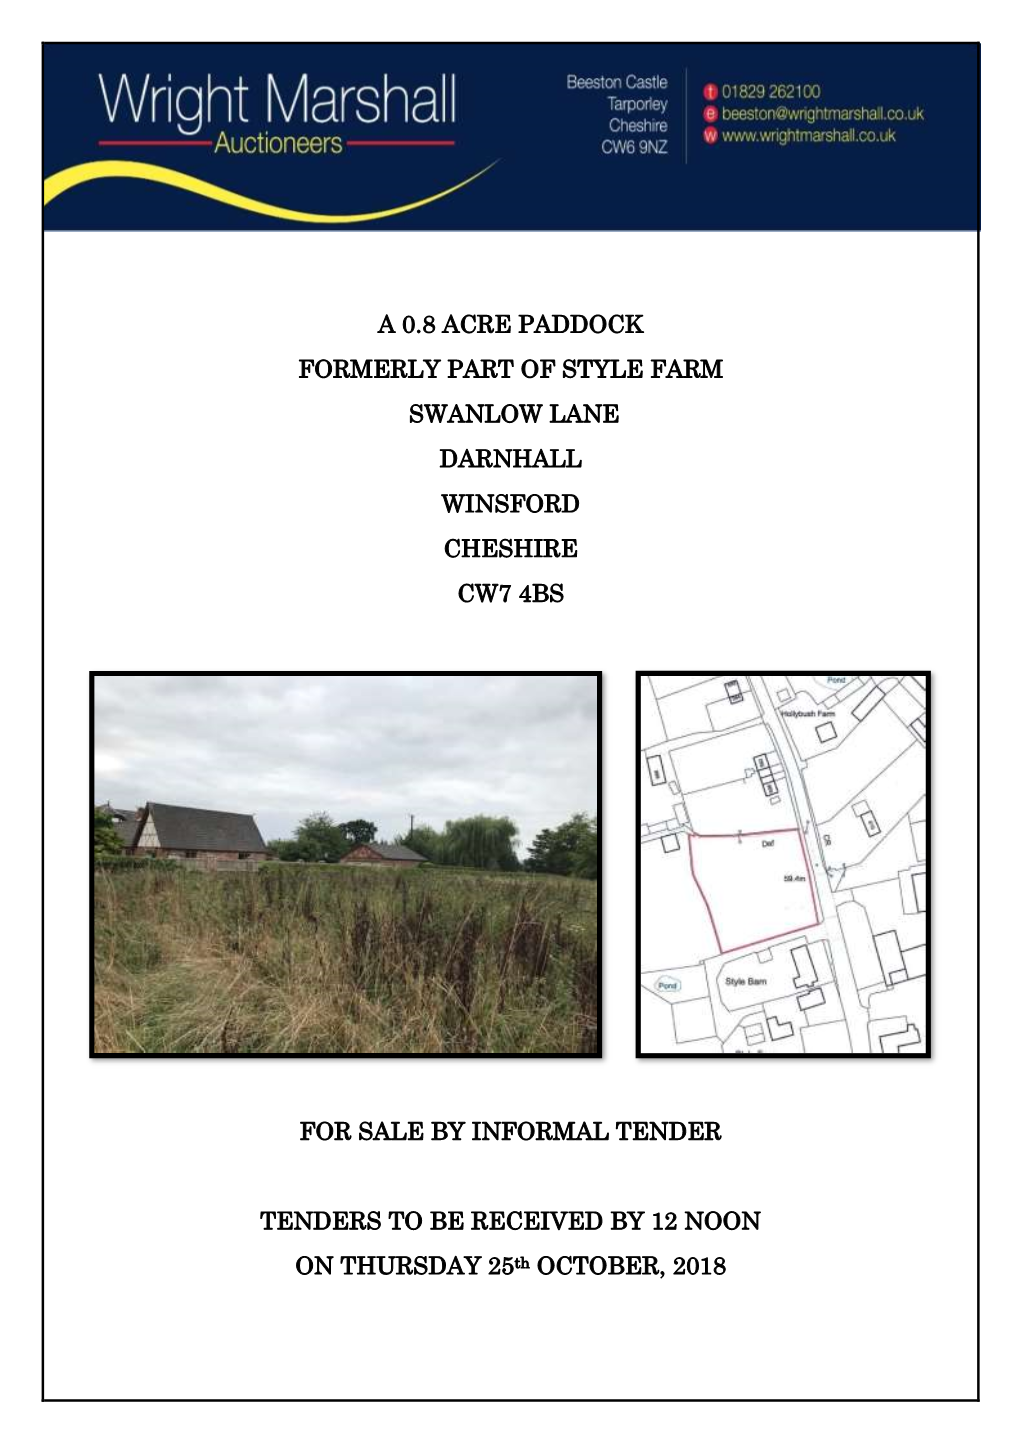 A 0.8 Acre Paddock Formerly Part of Style Farm Swanlow Lane Darnhall Winsford Cheshire Cw7 4Bs